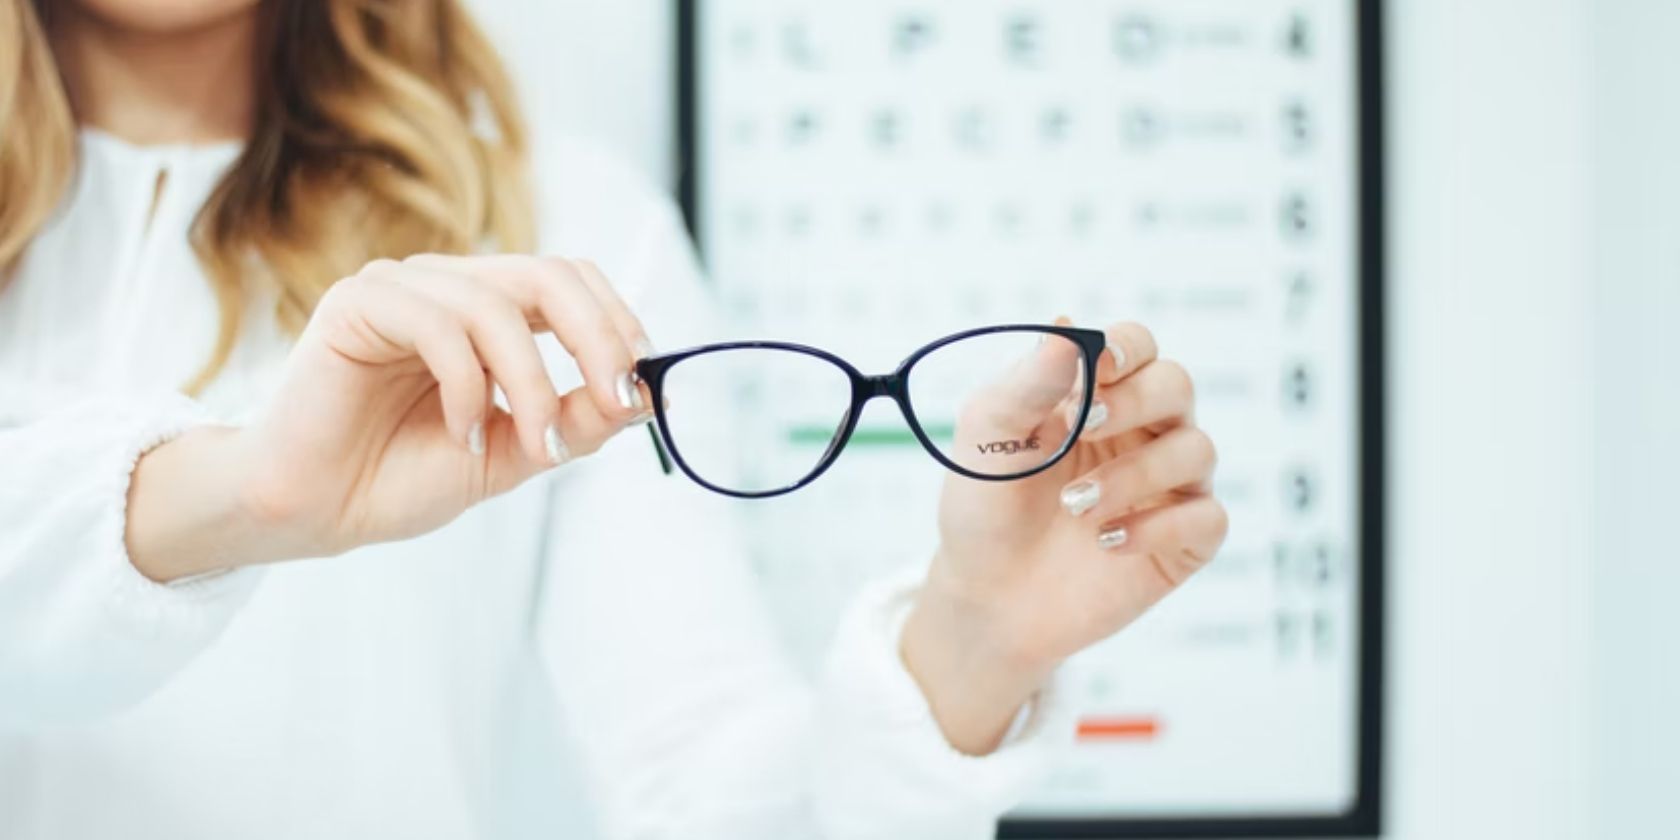 woman holding a pair of black framed glasses with eye test board in background